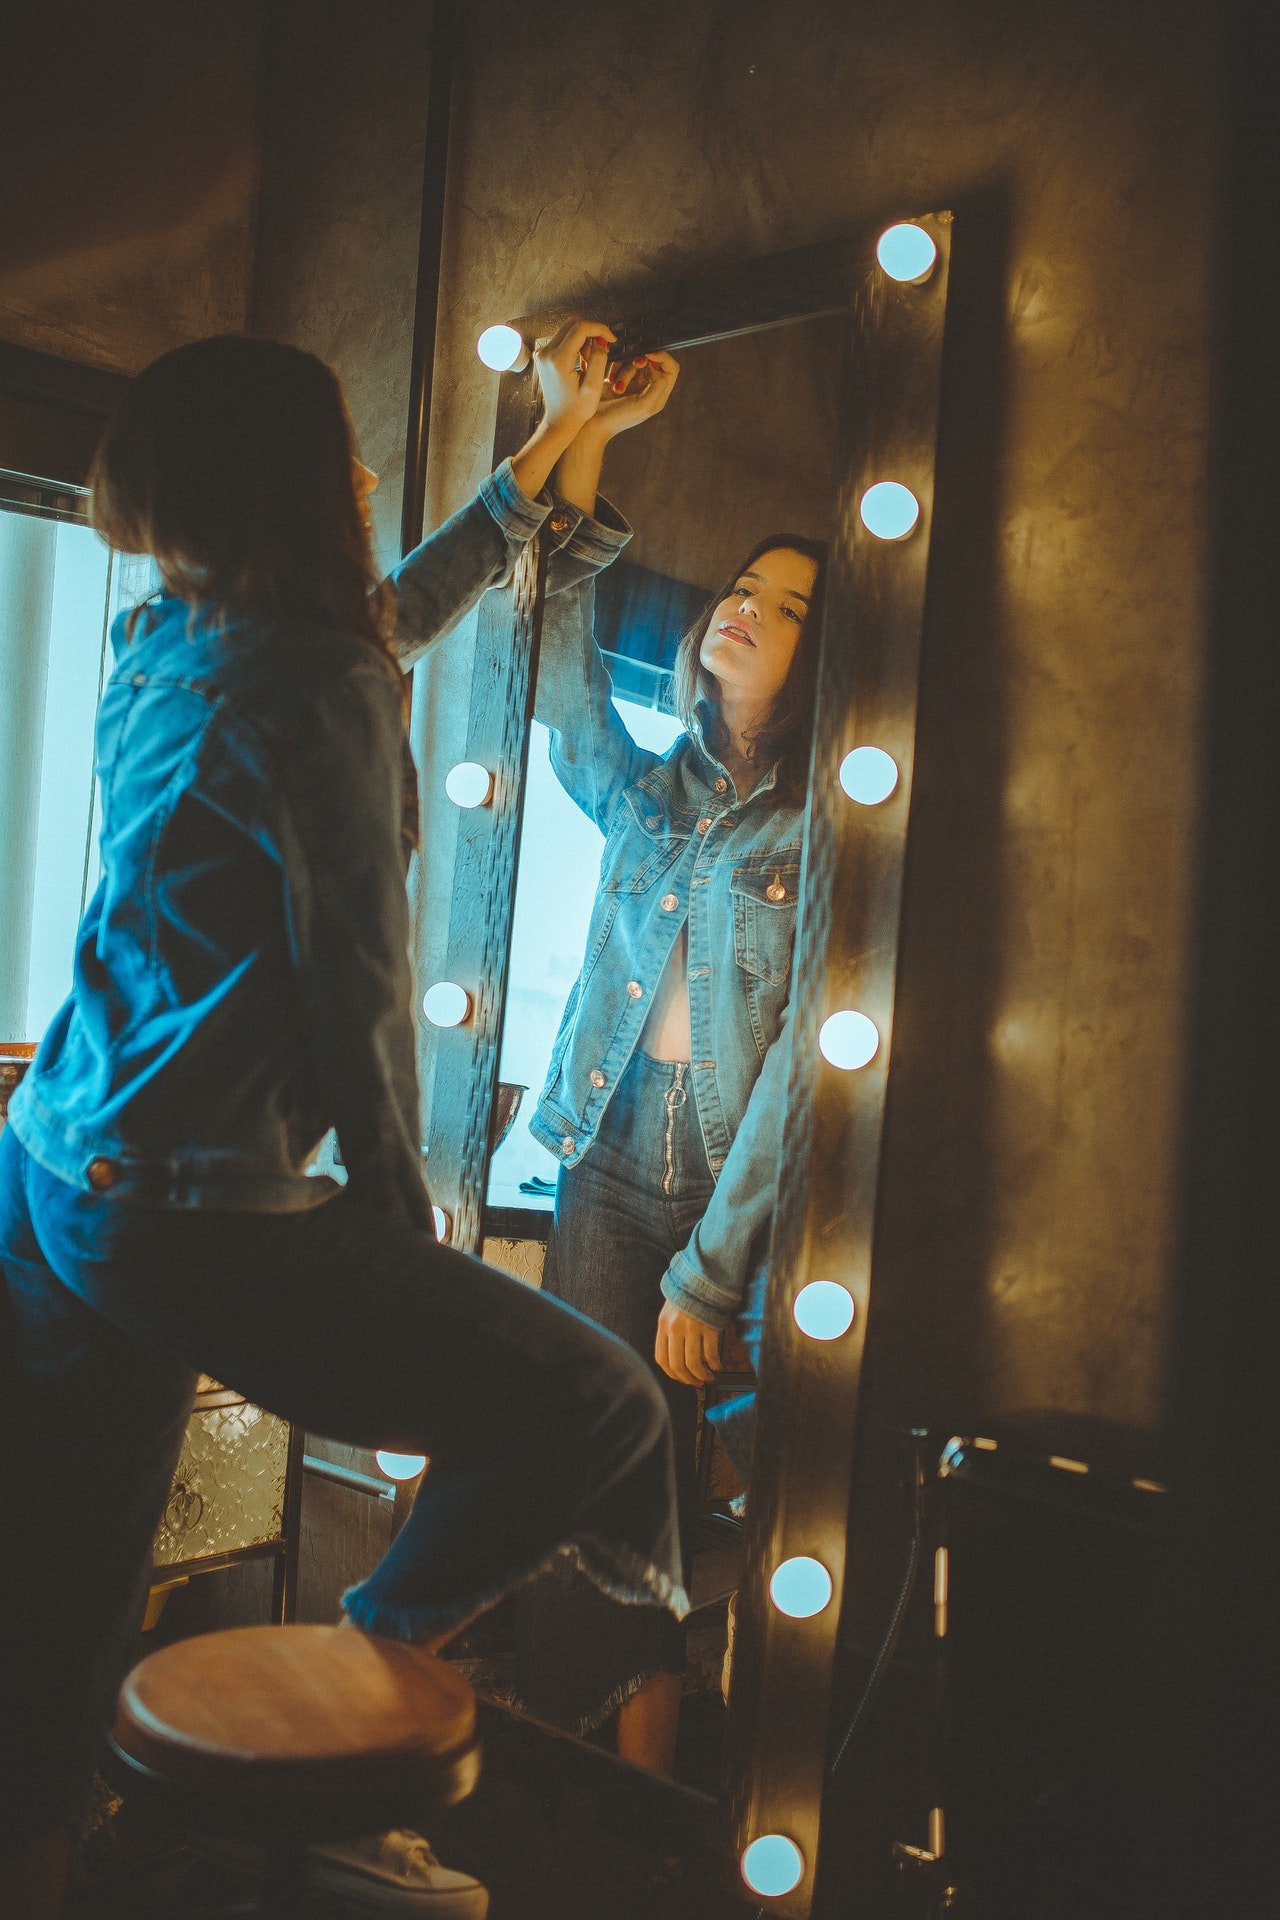 Megan wore the jacket in front of a mirror, and suddenly discovered something in the pocket. | Source: Pexels